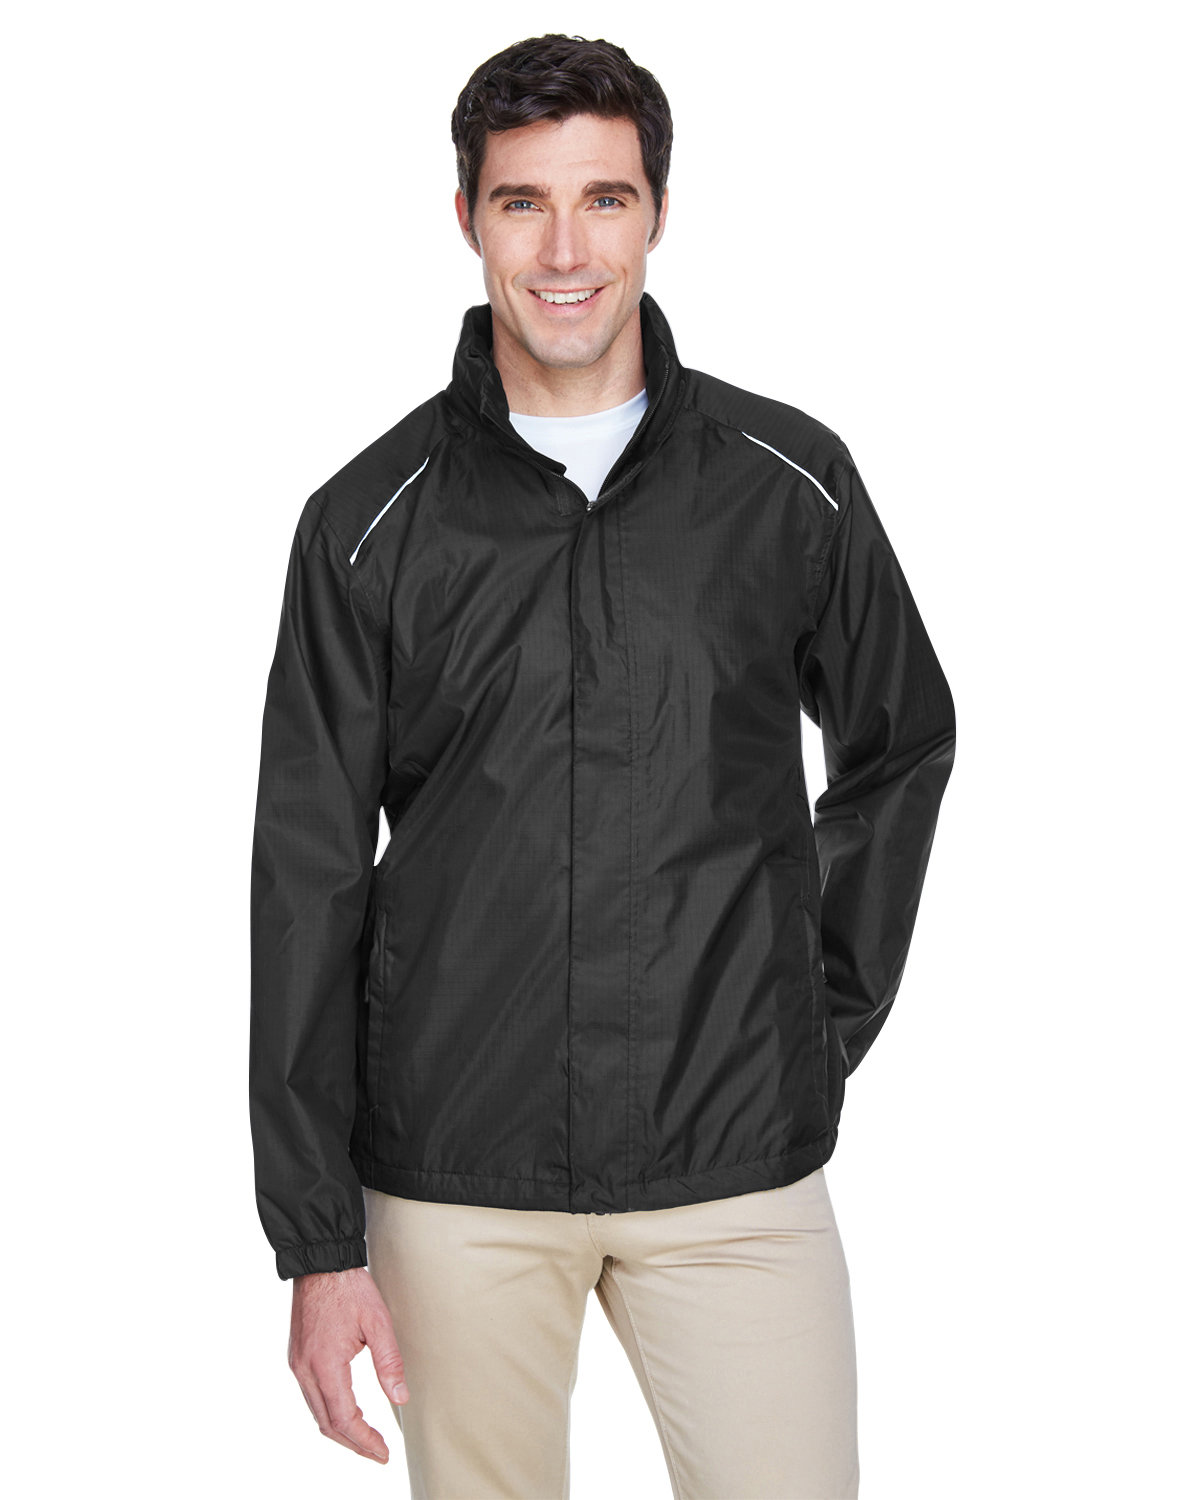 Core 365 Men's Climate Seam-Sealed Lightweight Variegated Ripstop Jacket BLACK 